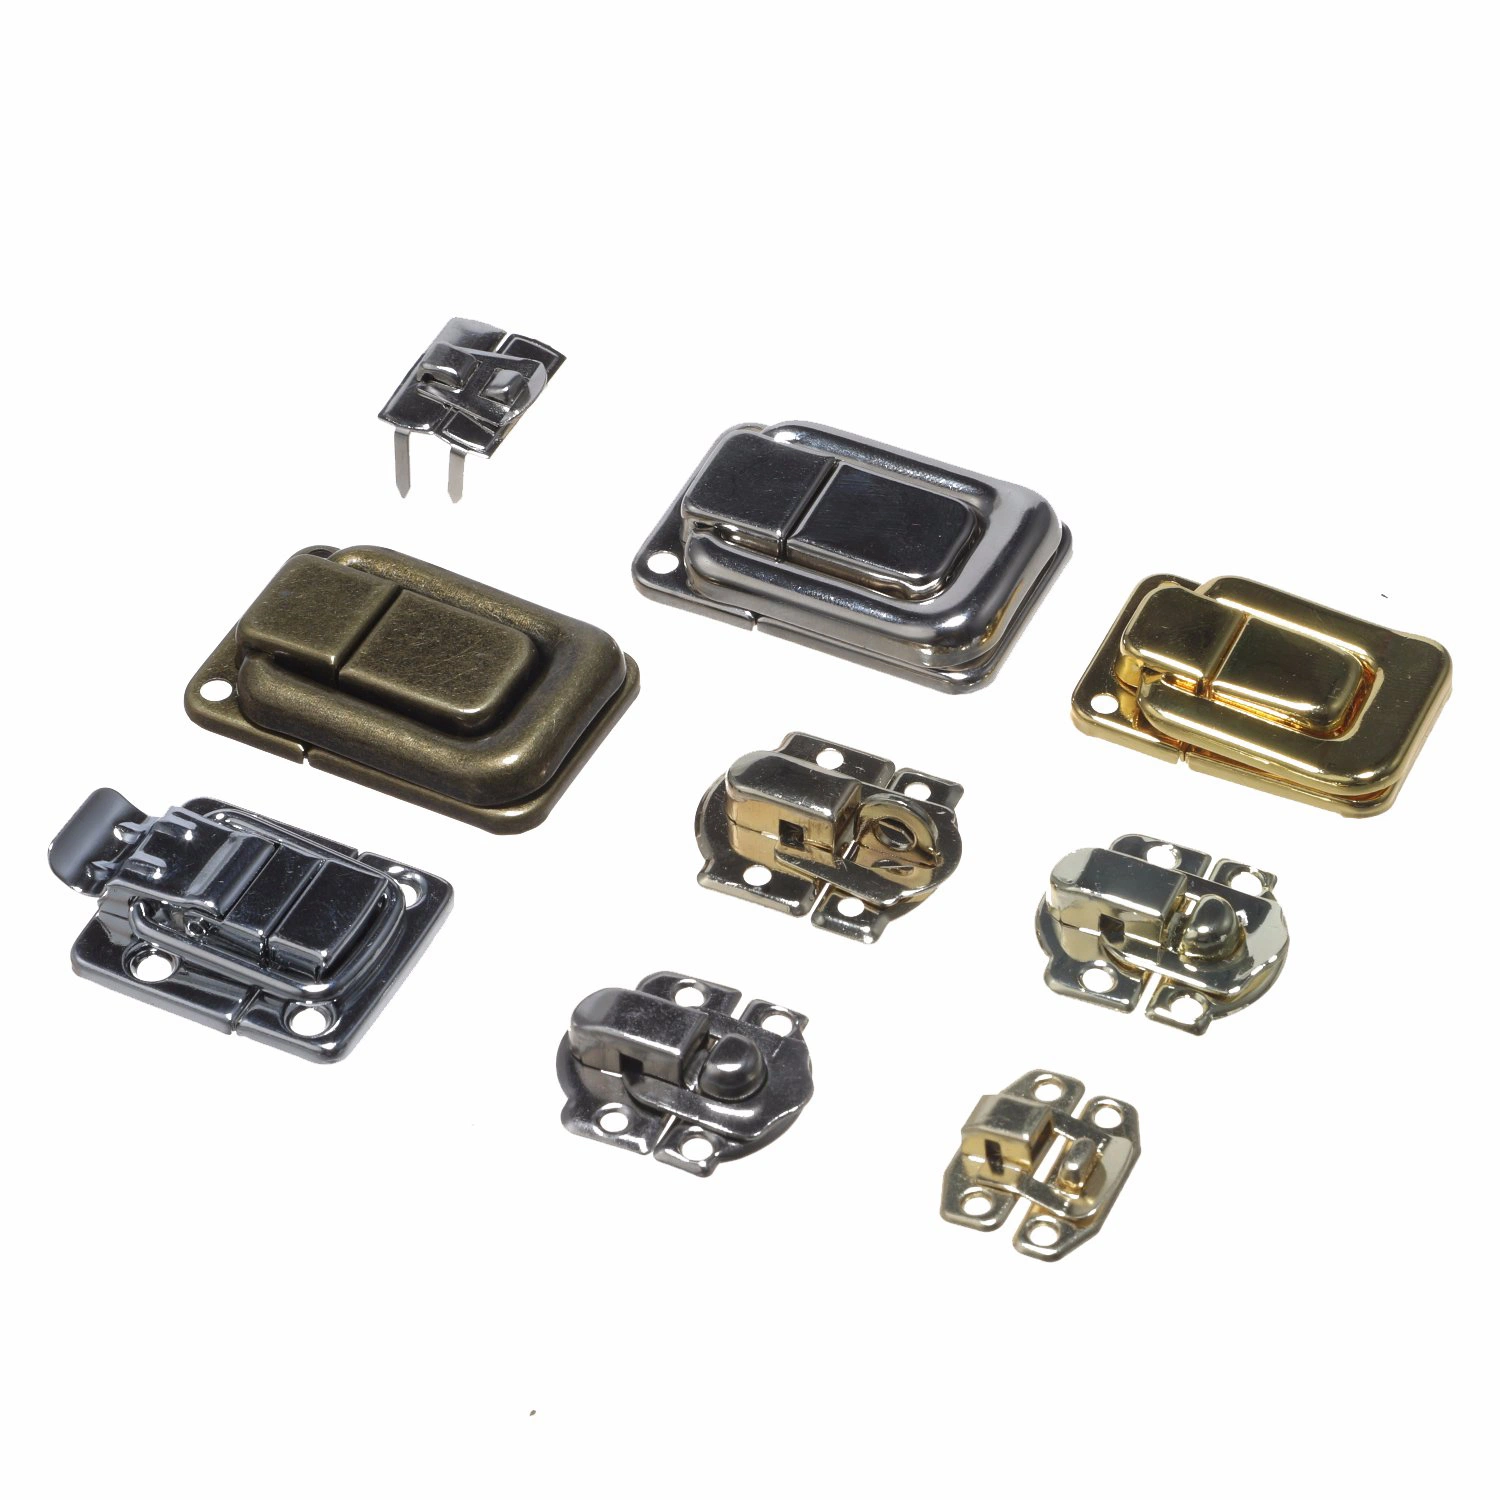 Furniture Hardware Fittings/Accessories Lock Catch, Hasp Lock, Toggle Latch, Bronze Colour Lock Buckle for Jewelry Boxes, Watch Cases, Wine Boxes, Lock Catch